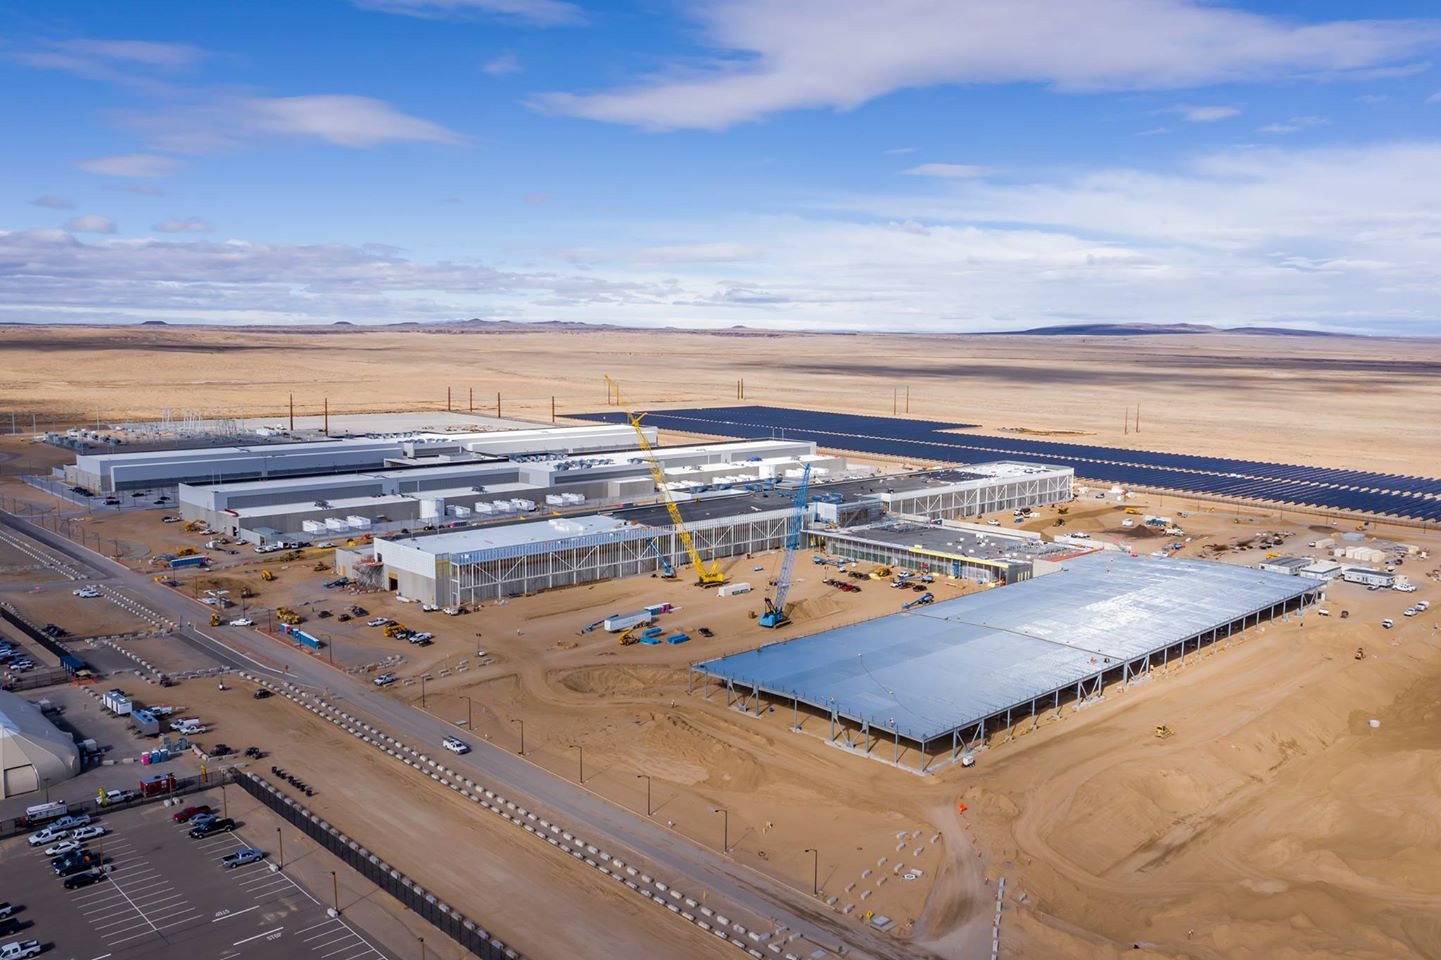 Facebook launches third data center in Los Lunas, New Mexico - DCD